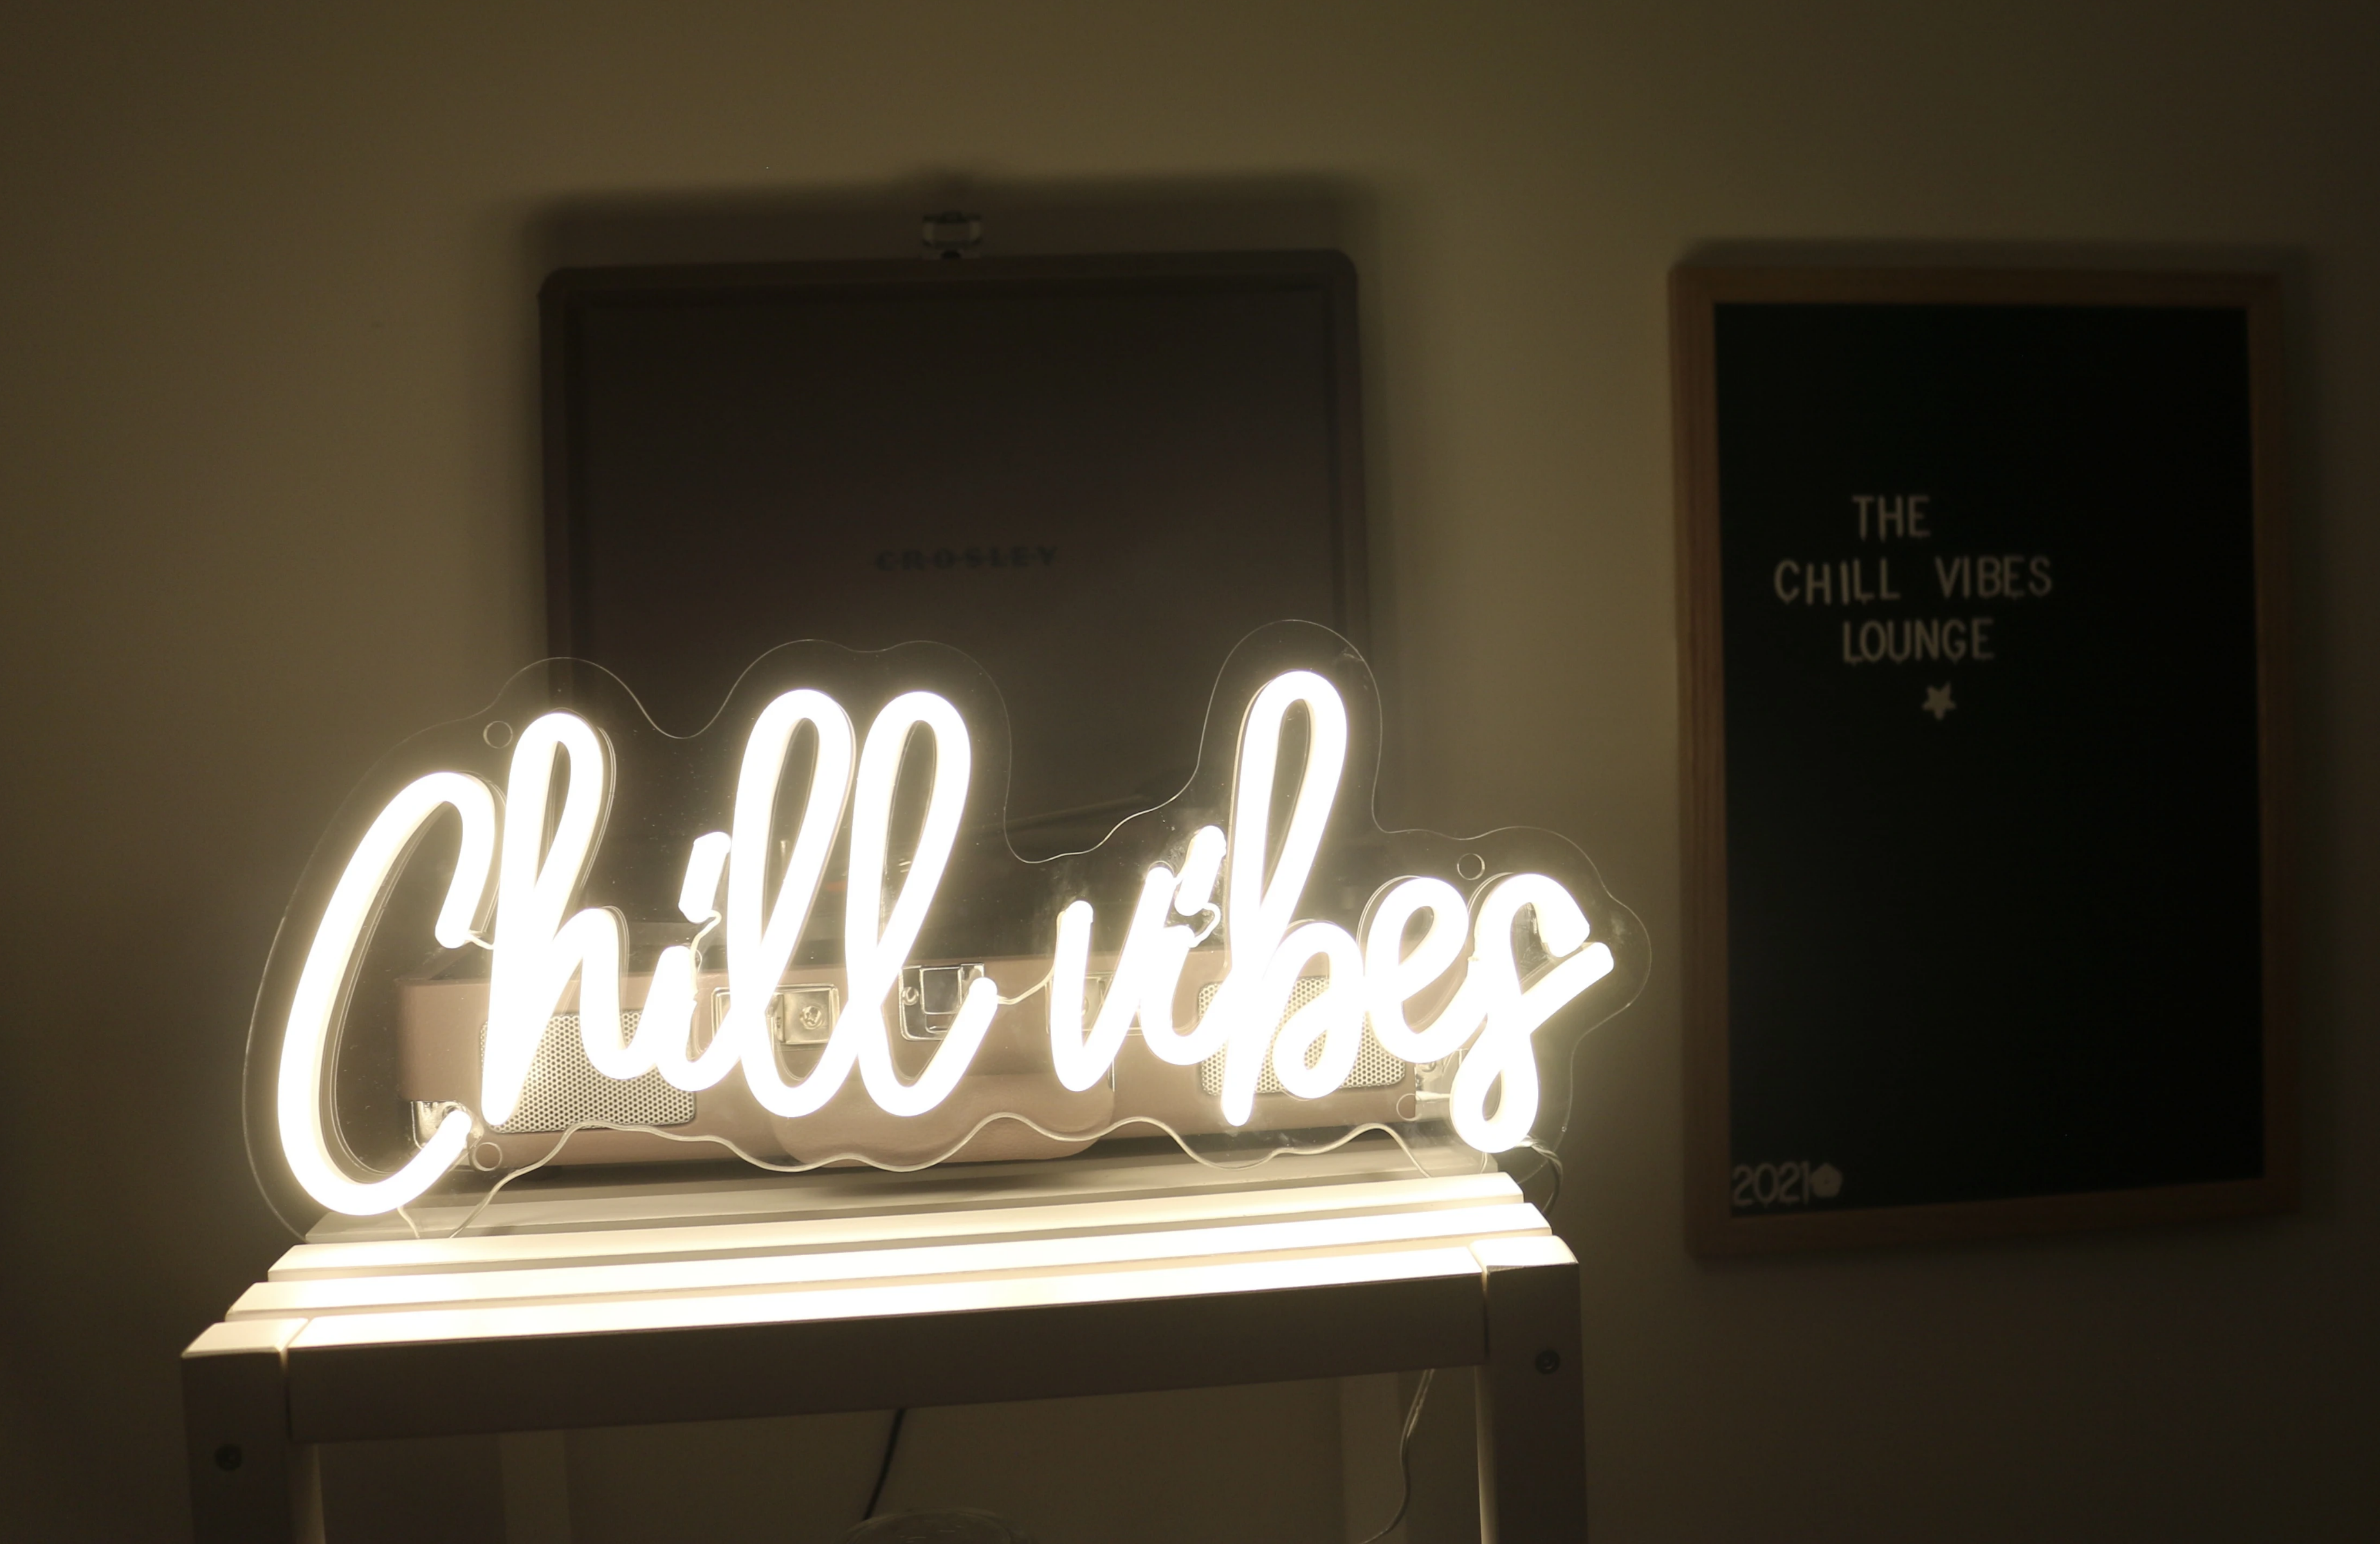 Massage Sociologi komplet Chill Vibes Neon Sign – The Chill Vibes Lounge